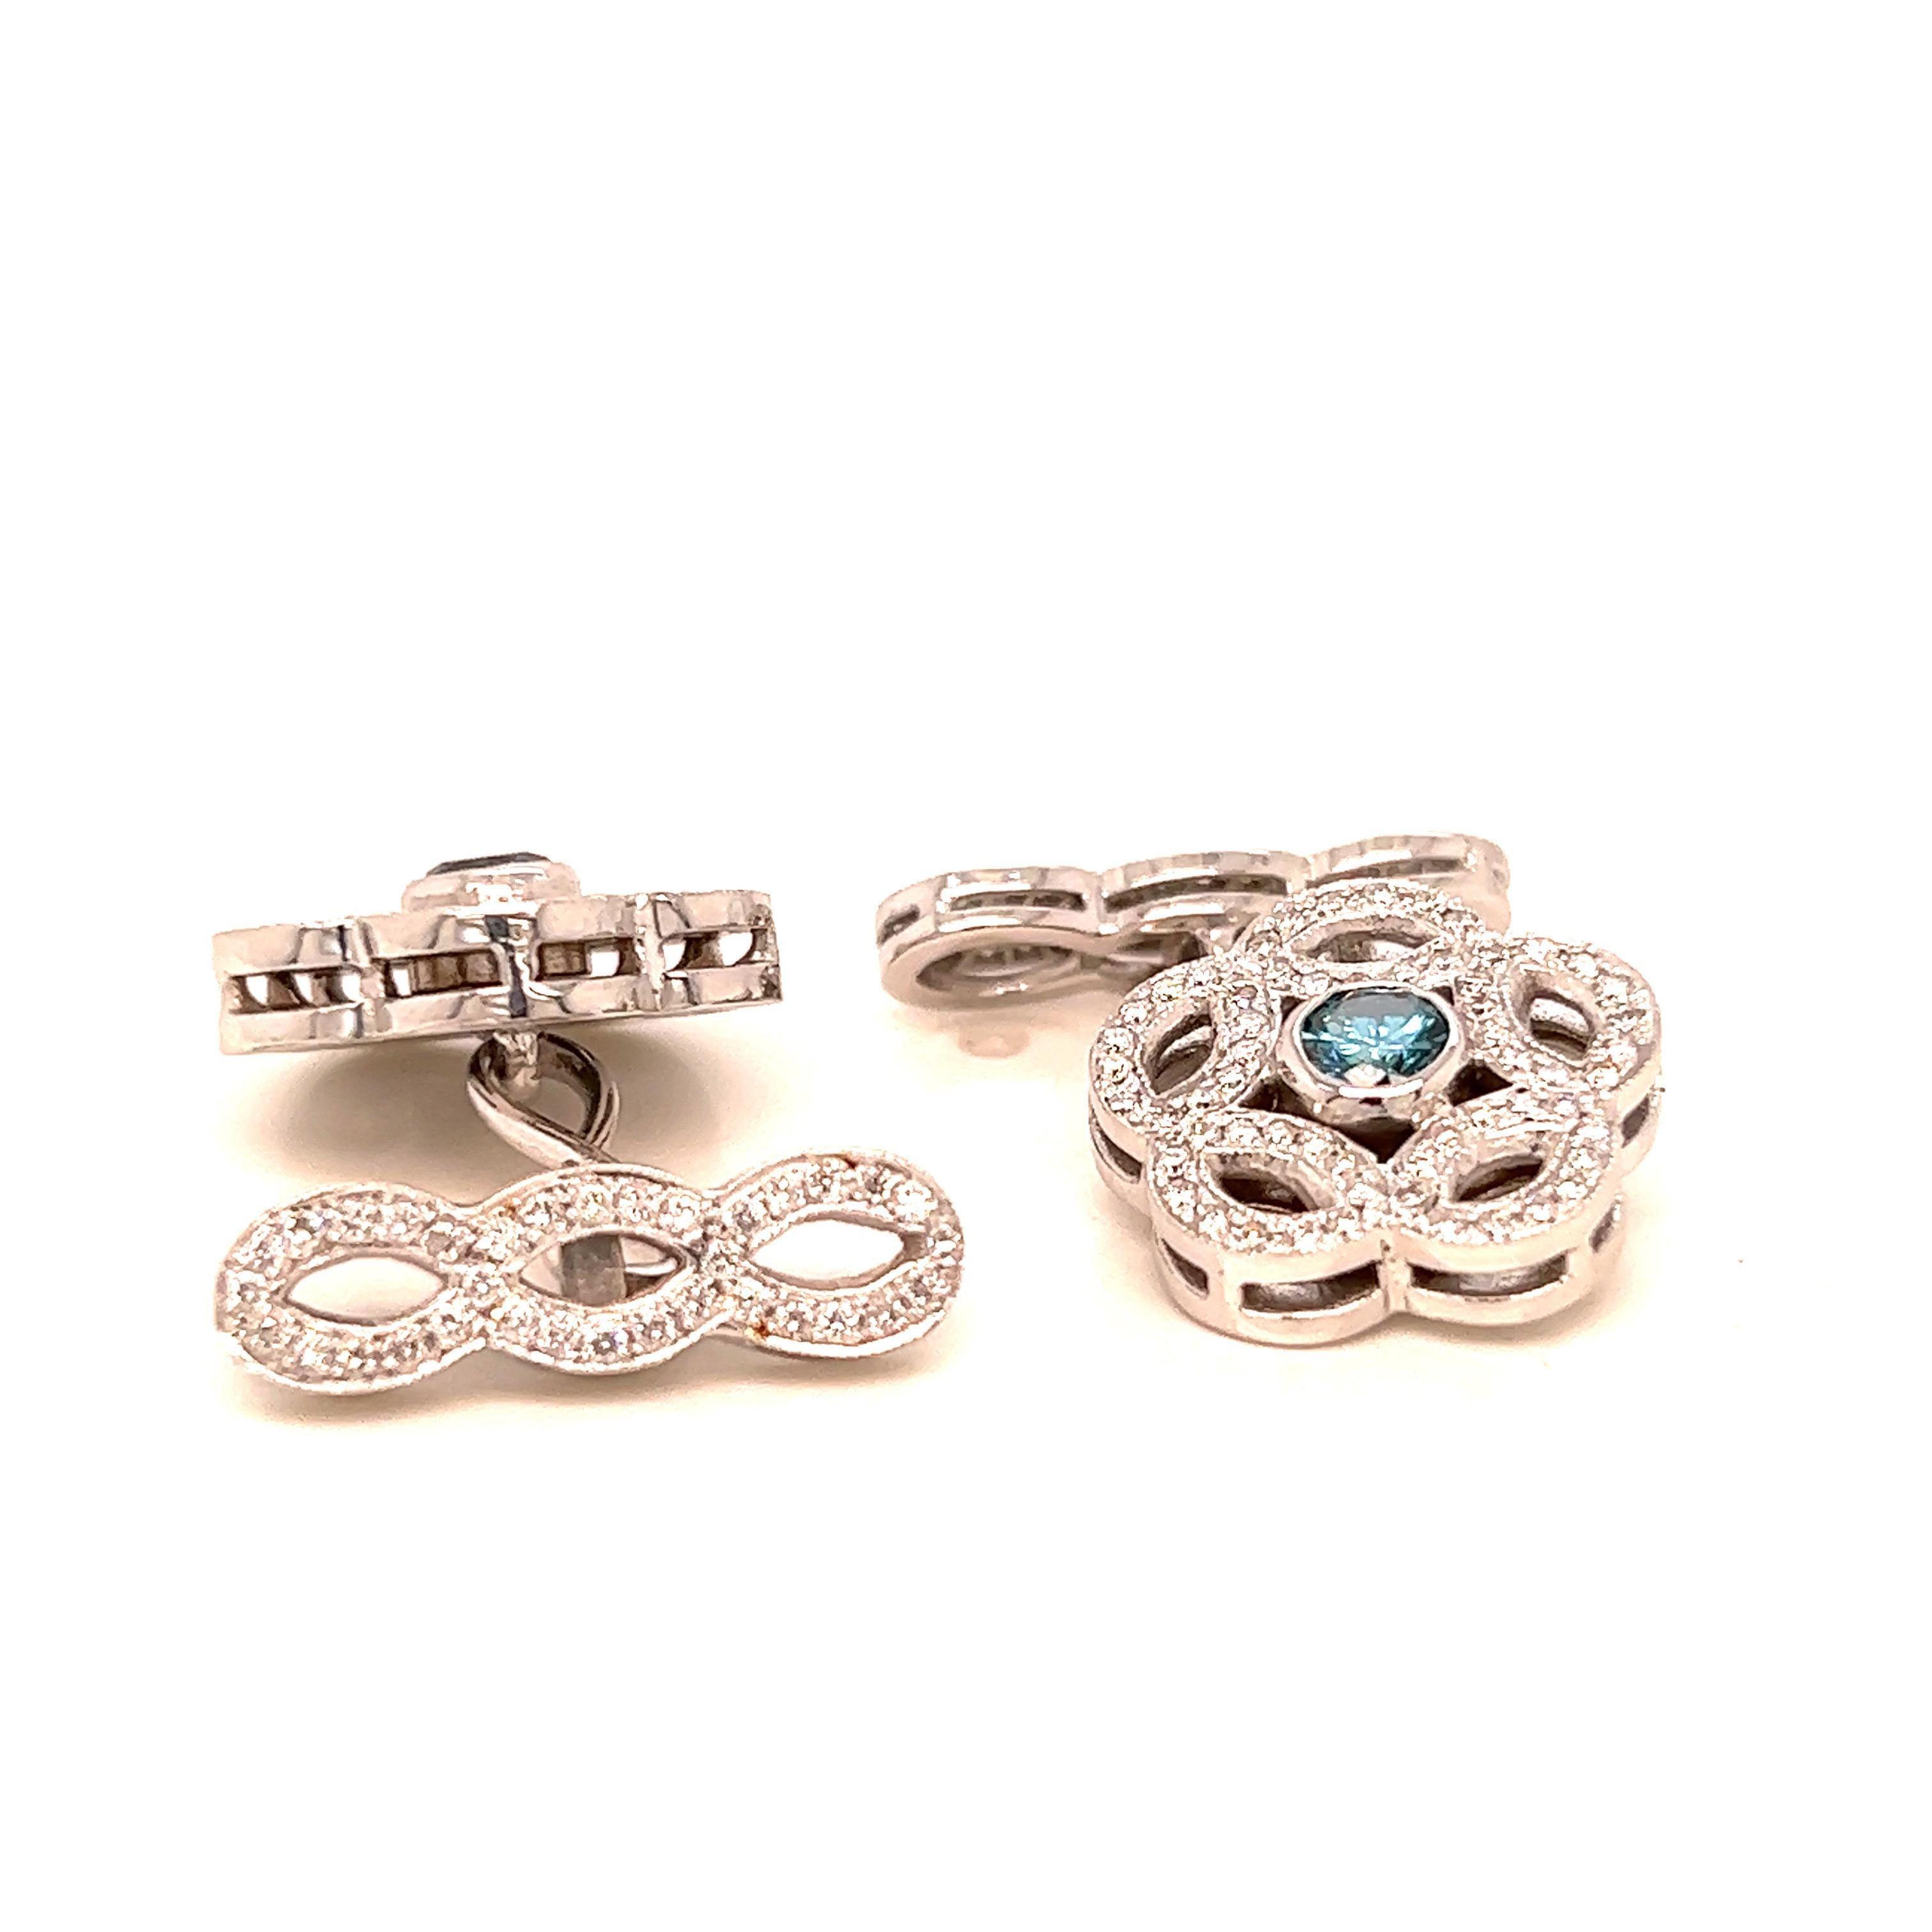 These exquisite cufflinks are a true testament to the beauty and craftsmanship of fine jewelry. Crafted from lustrous 18k white gold, each cufflink features a delicate flower design that is adorned with approximately 0.80 carats of brilliant white